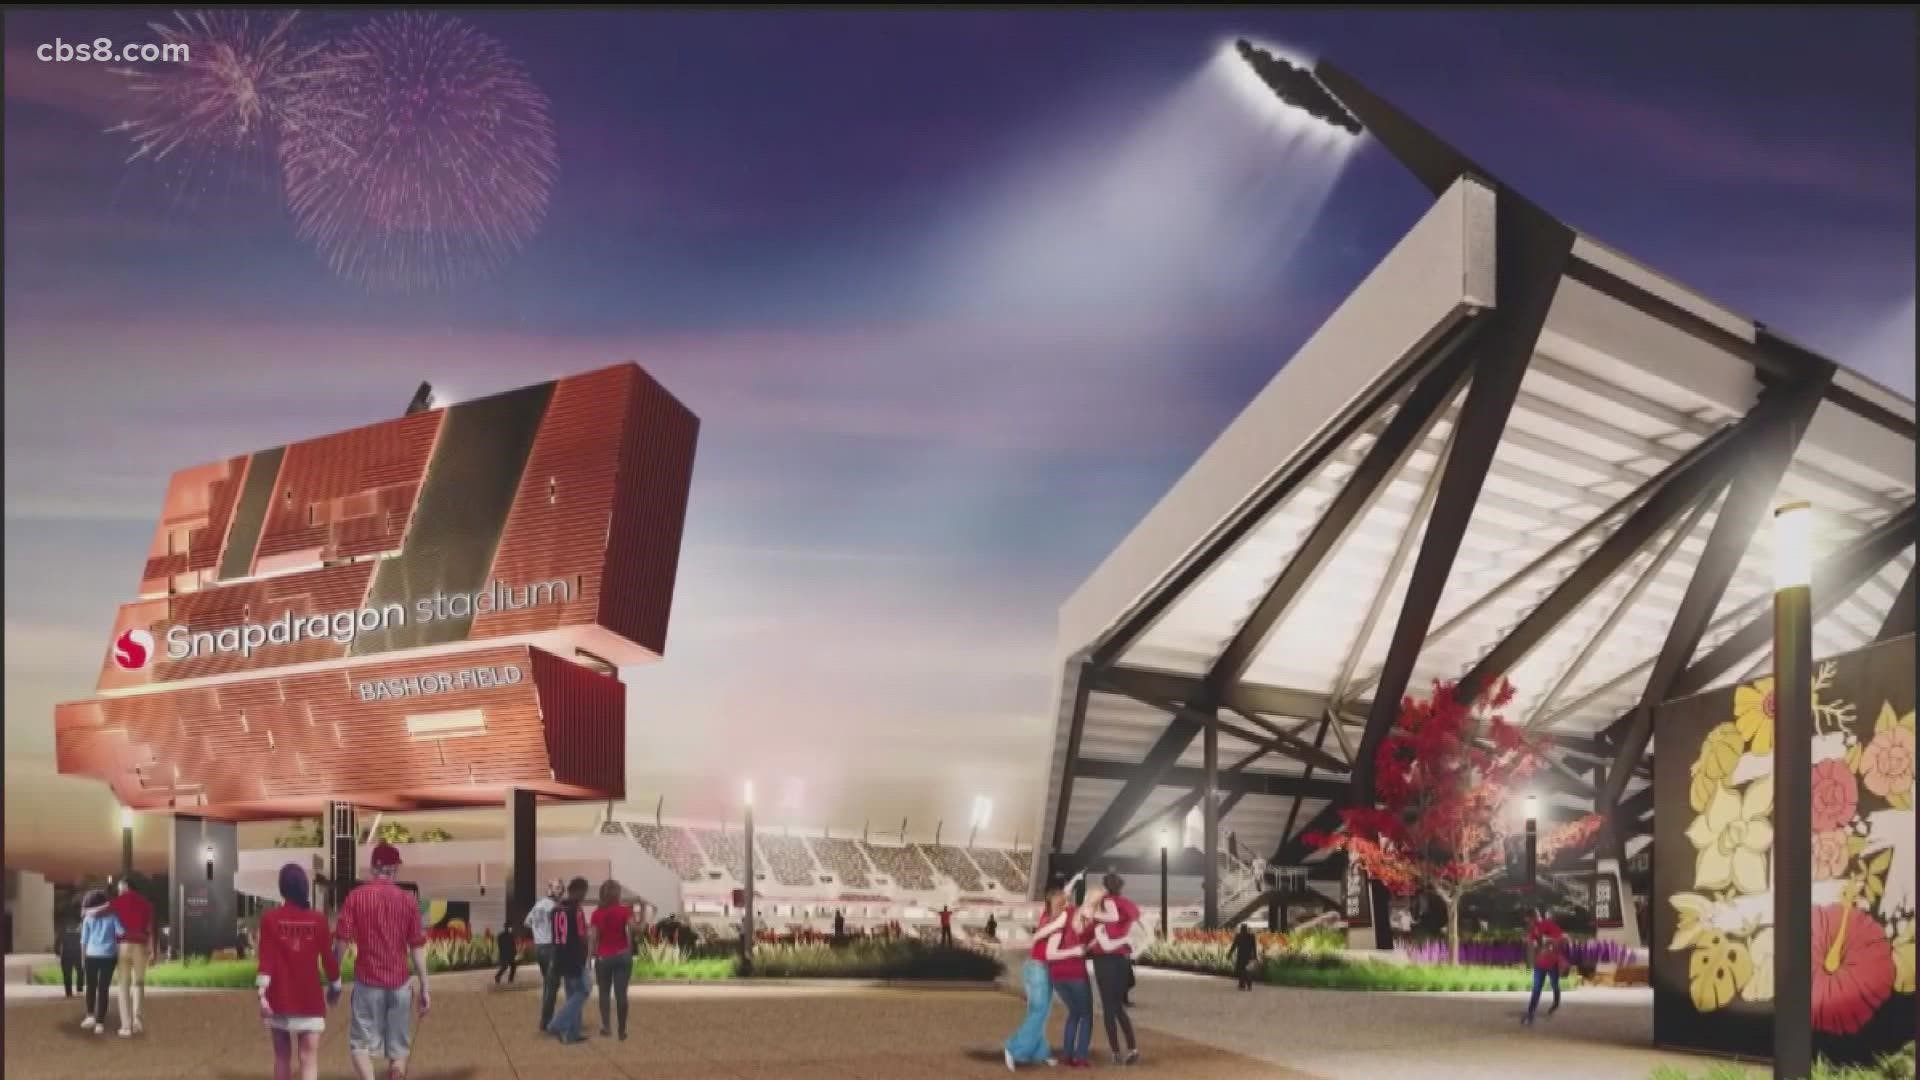 The $45M exclusive naming rights deal with Qualcomm Technologies, Inc. is for 15 years.